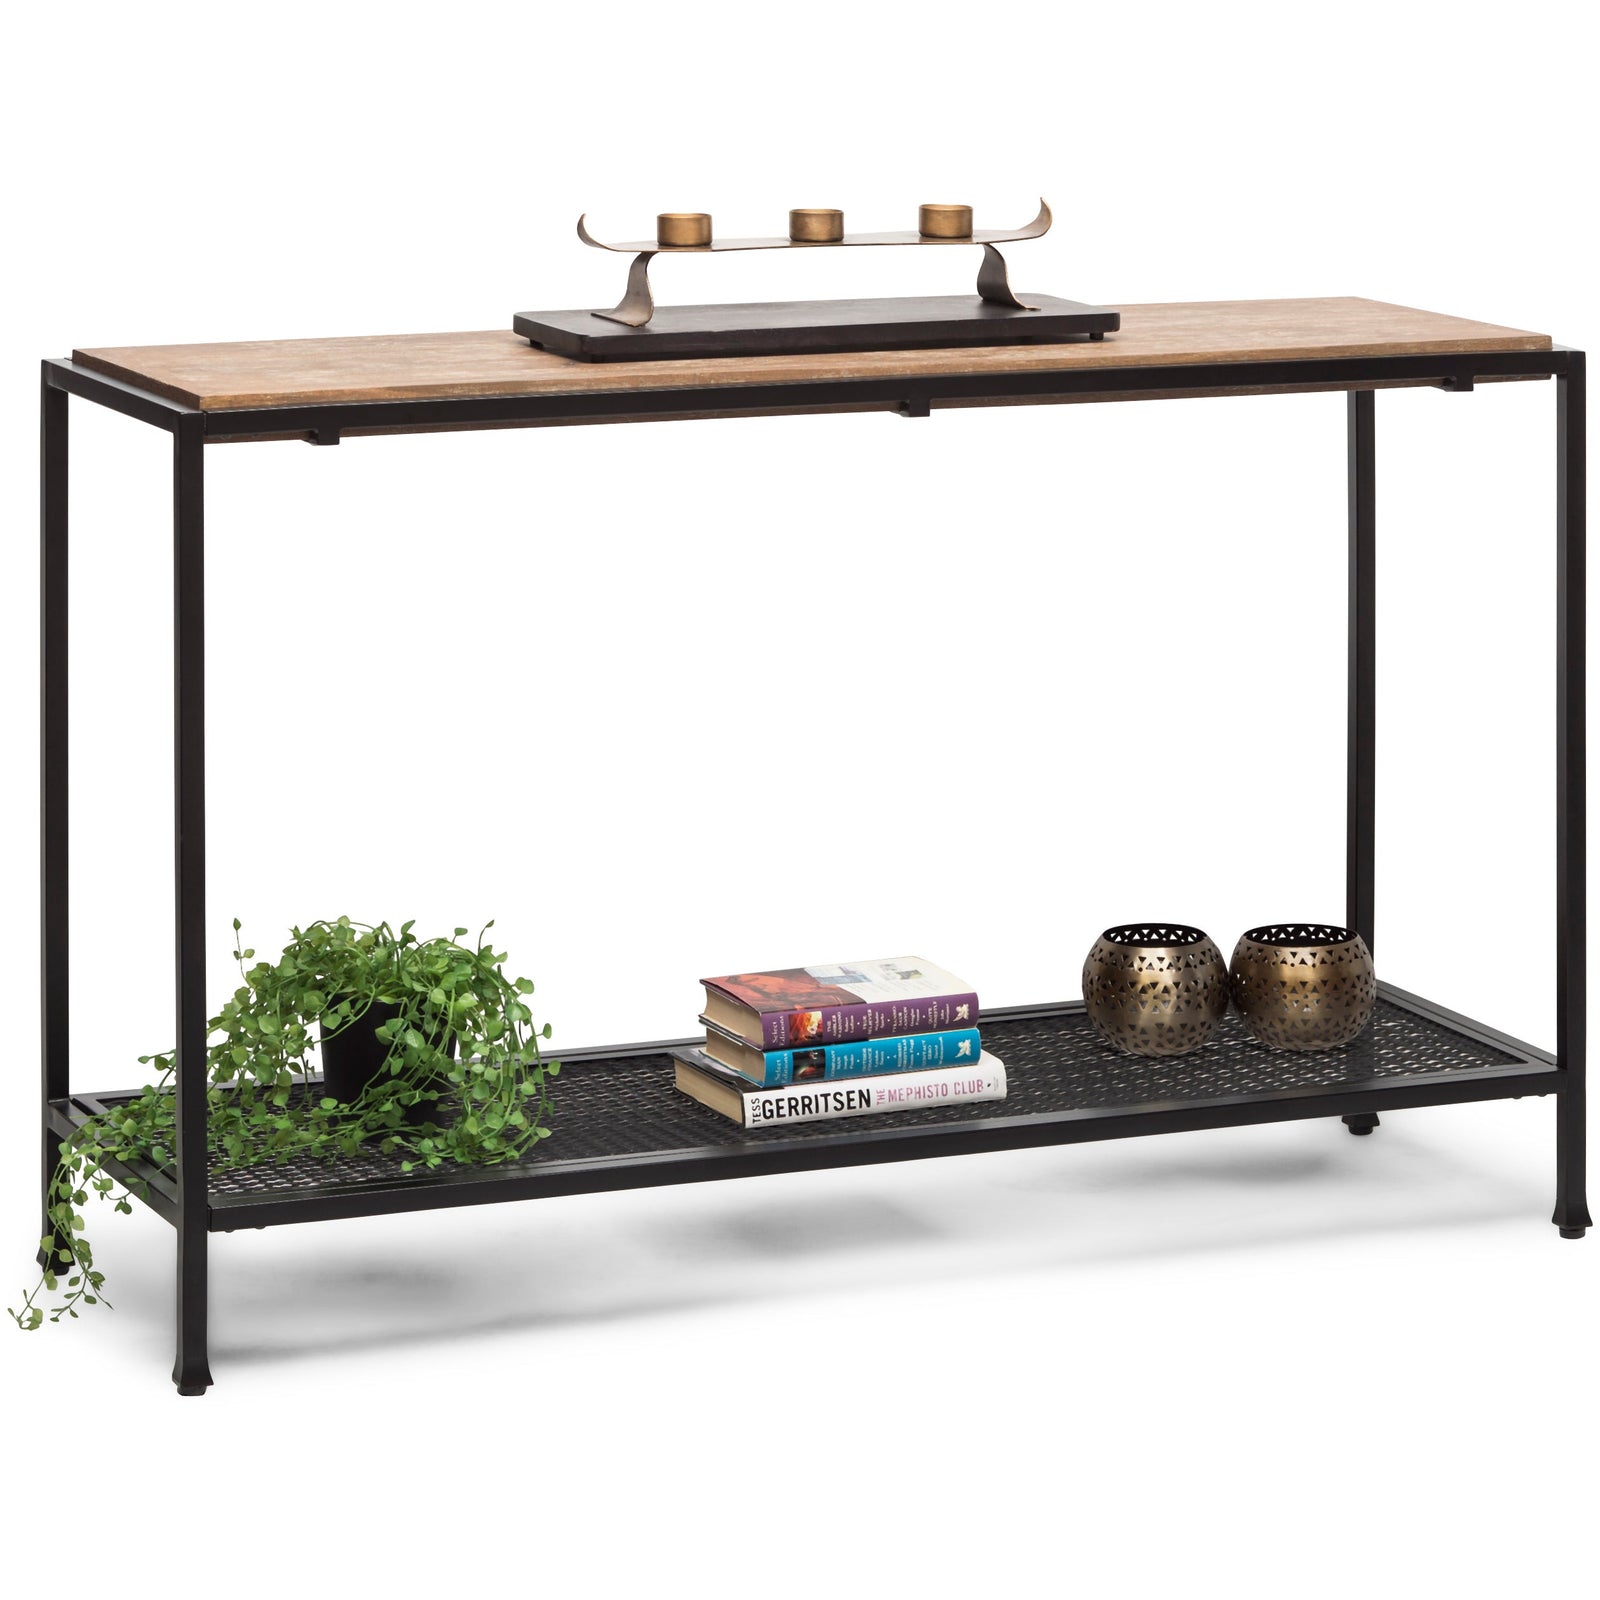 Black Iron Hallway Console Table with Distressed Wood Top